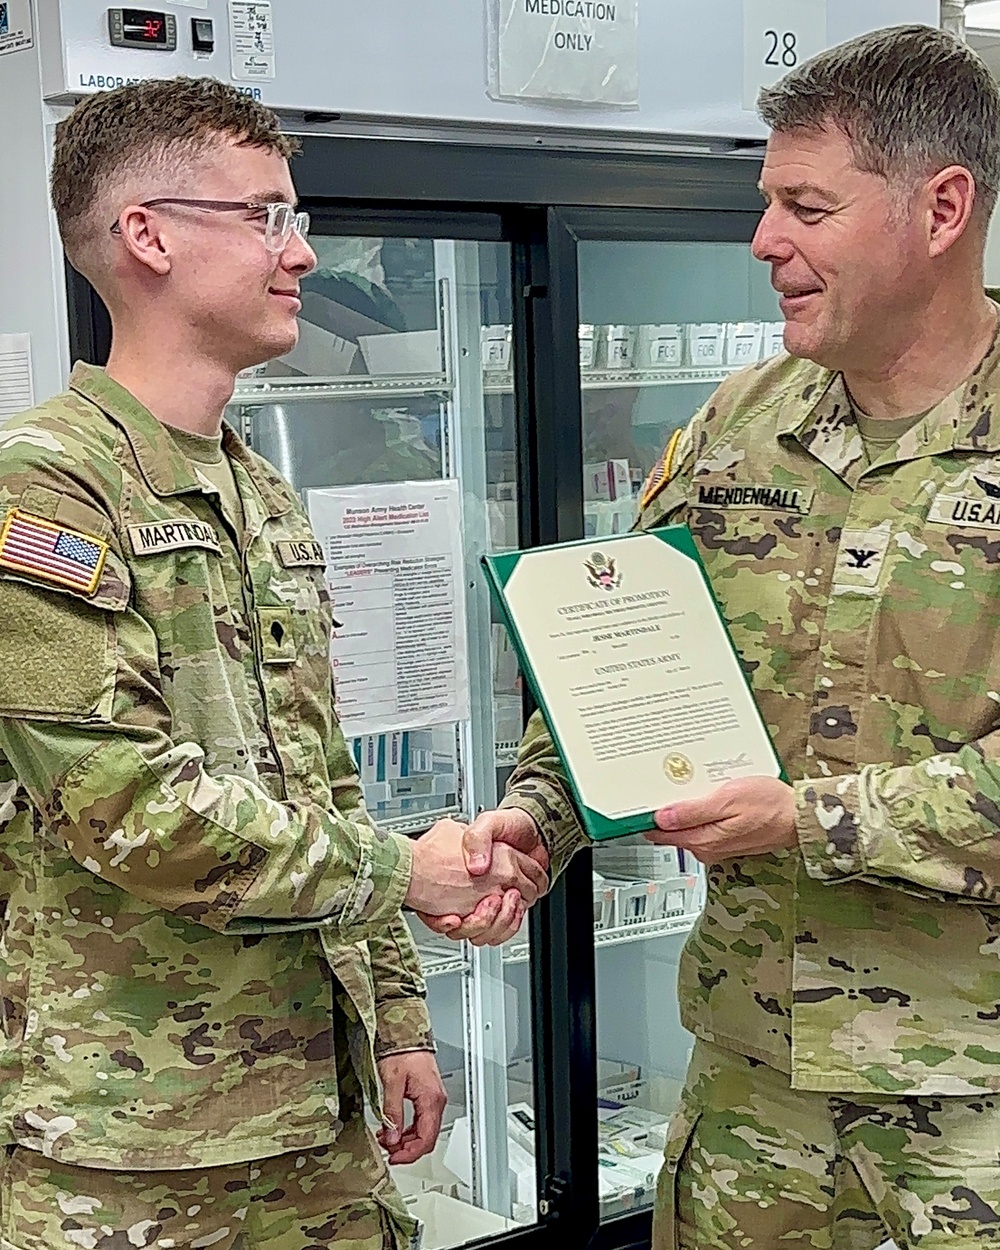 Munson Army Health Center Soldier promoted through Army Recruiting Program